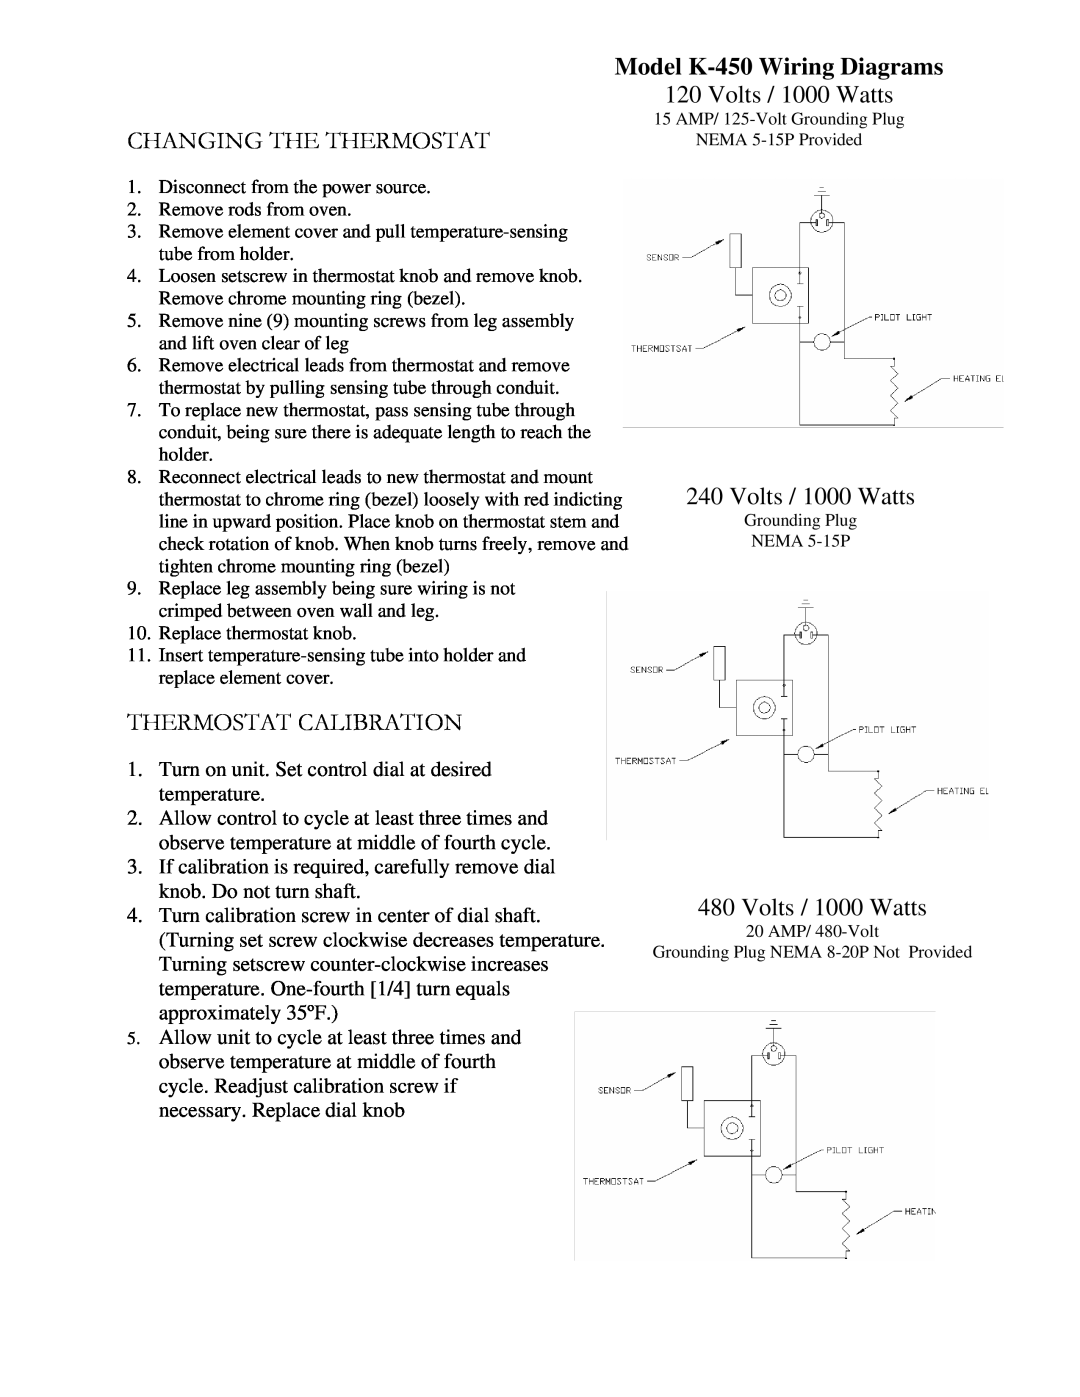 Henkel manual Model K-450Wiring Diagrams, Volts / 1000 Watts, Changing The Thermostat, Thermostat Calibration 